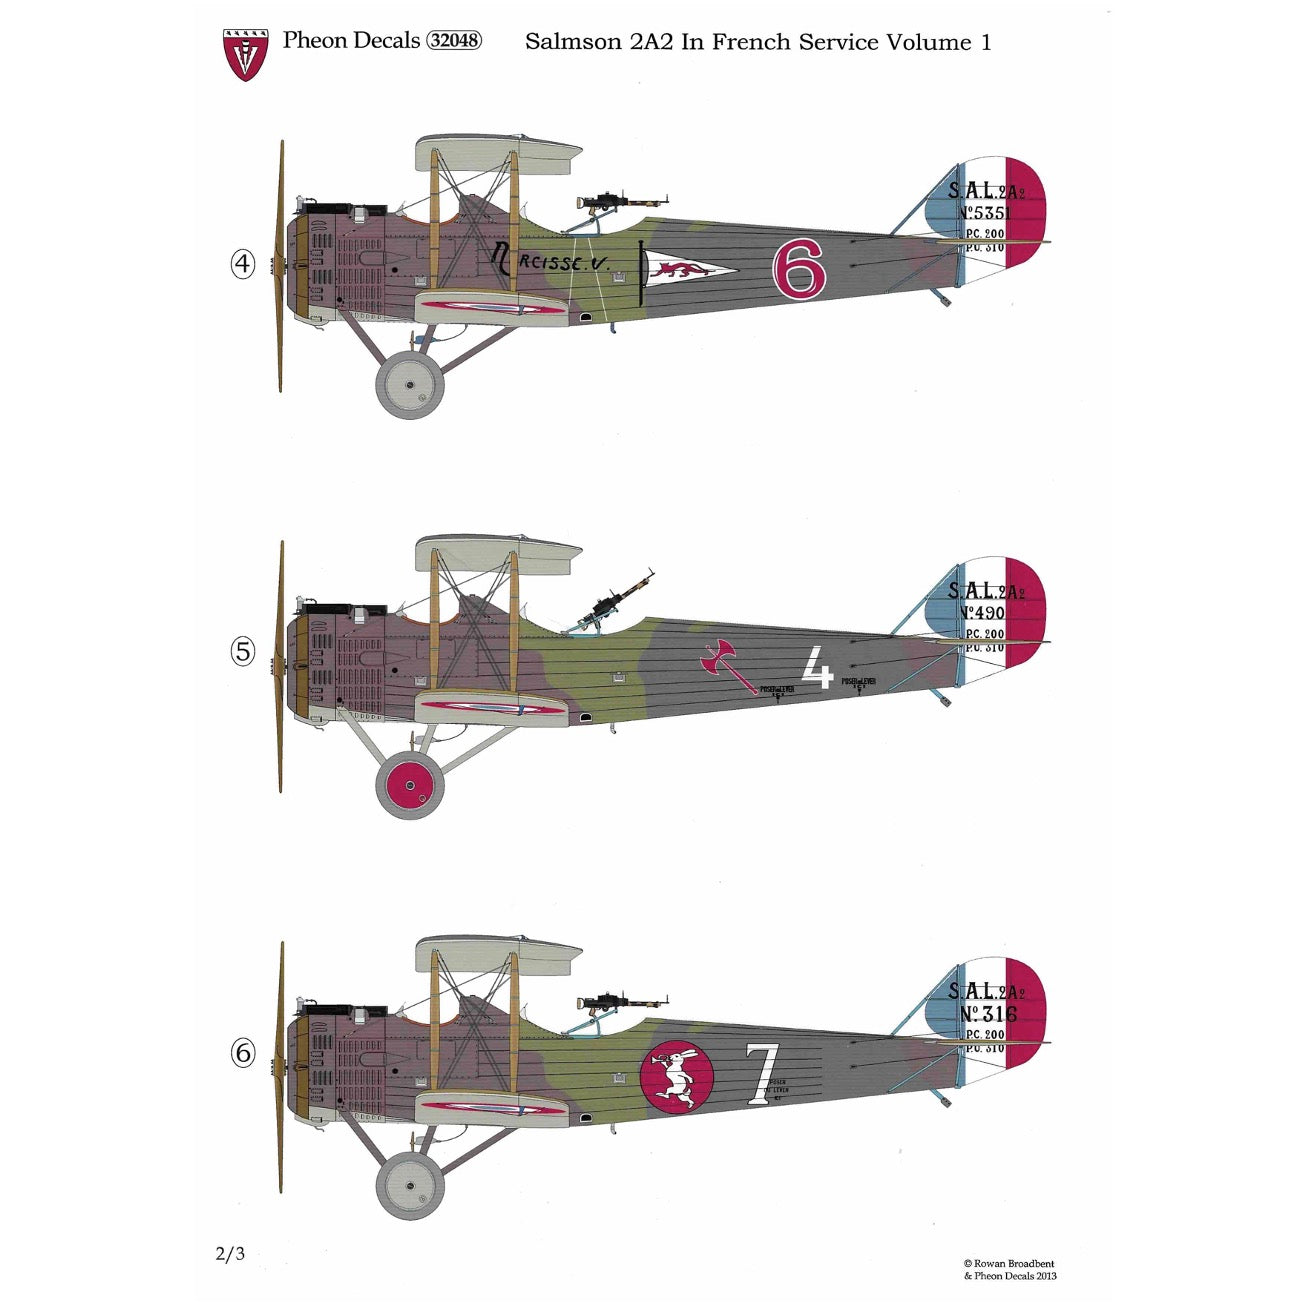 1/32 - Salmson 2A2 in French Service - Vol 1